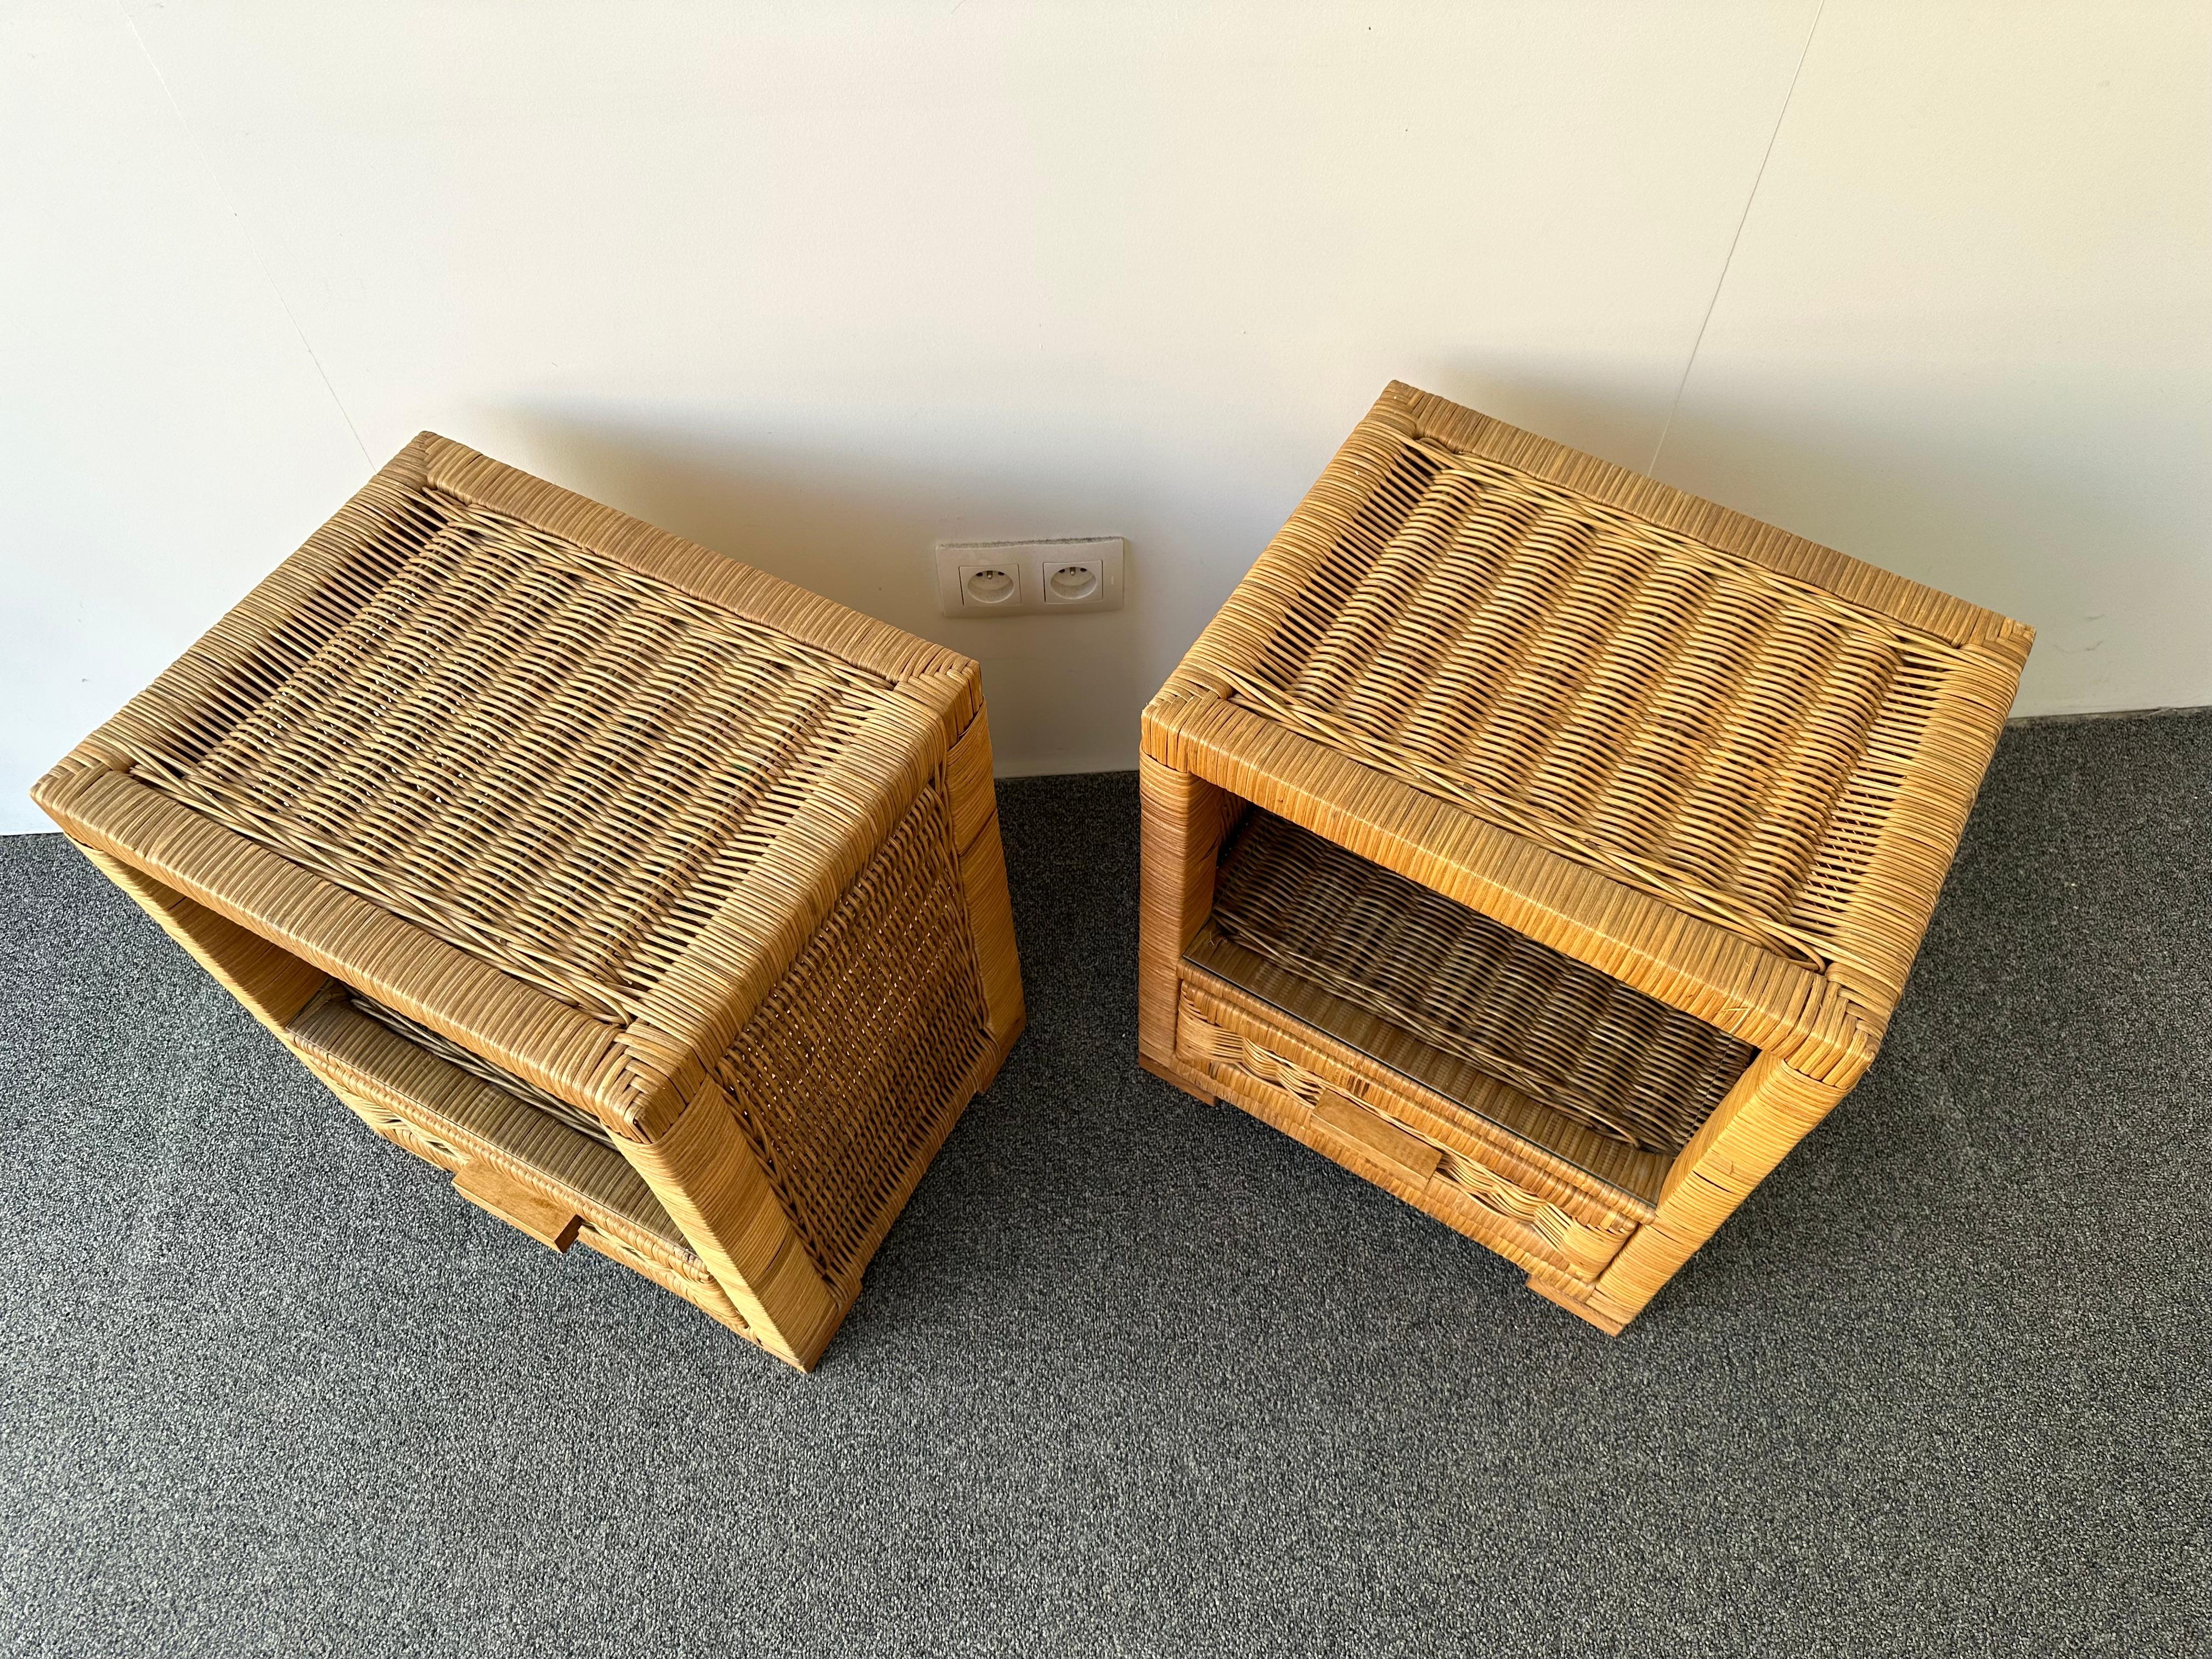 Pair of Rattan Bedside Tables by Tito Agnoli, Italy, 1970s For Sale 4